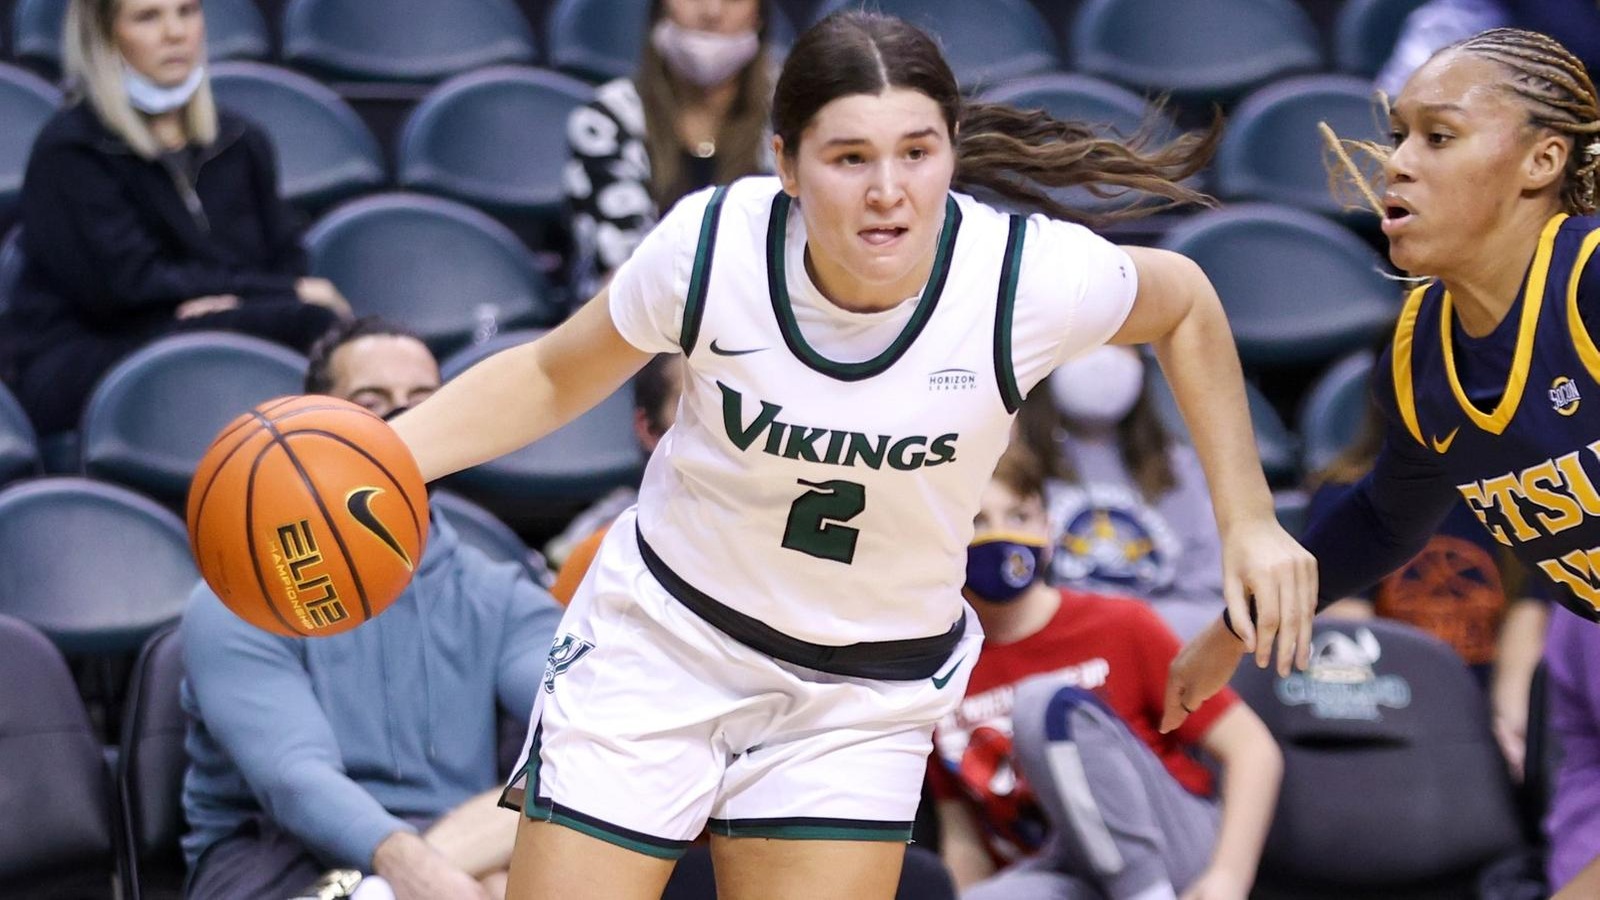 Leo’s Career-High Leads Women’s Basketball To 63-52 Victory At NKU